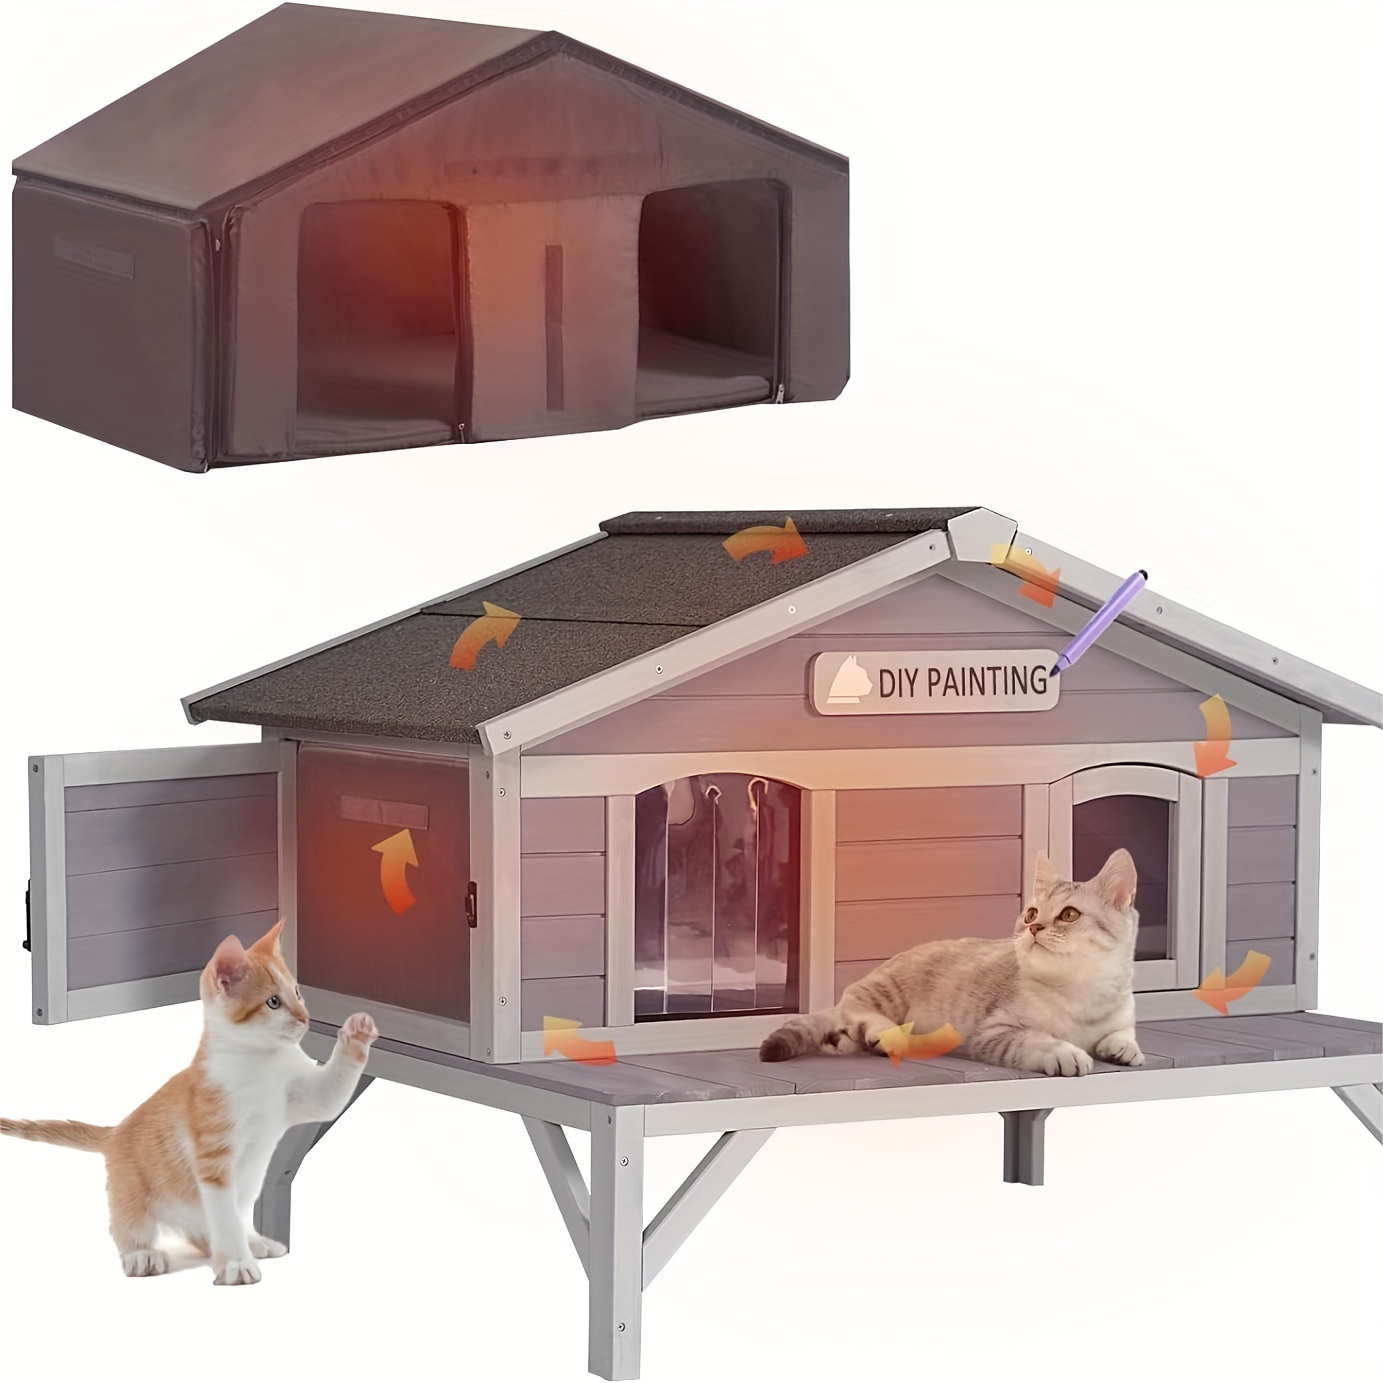 

Aivituvin Outdoor Cat House, Outside Cat Enclosure Fully Insulated, 100% Insulated Weatherproof Feral Cat Shelter For Winter